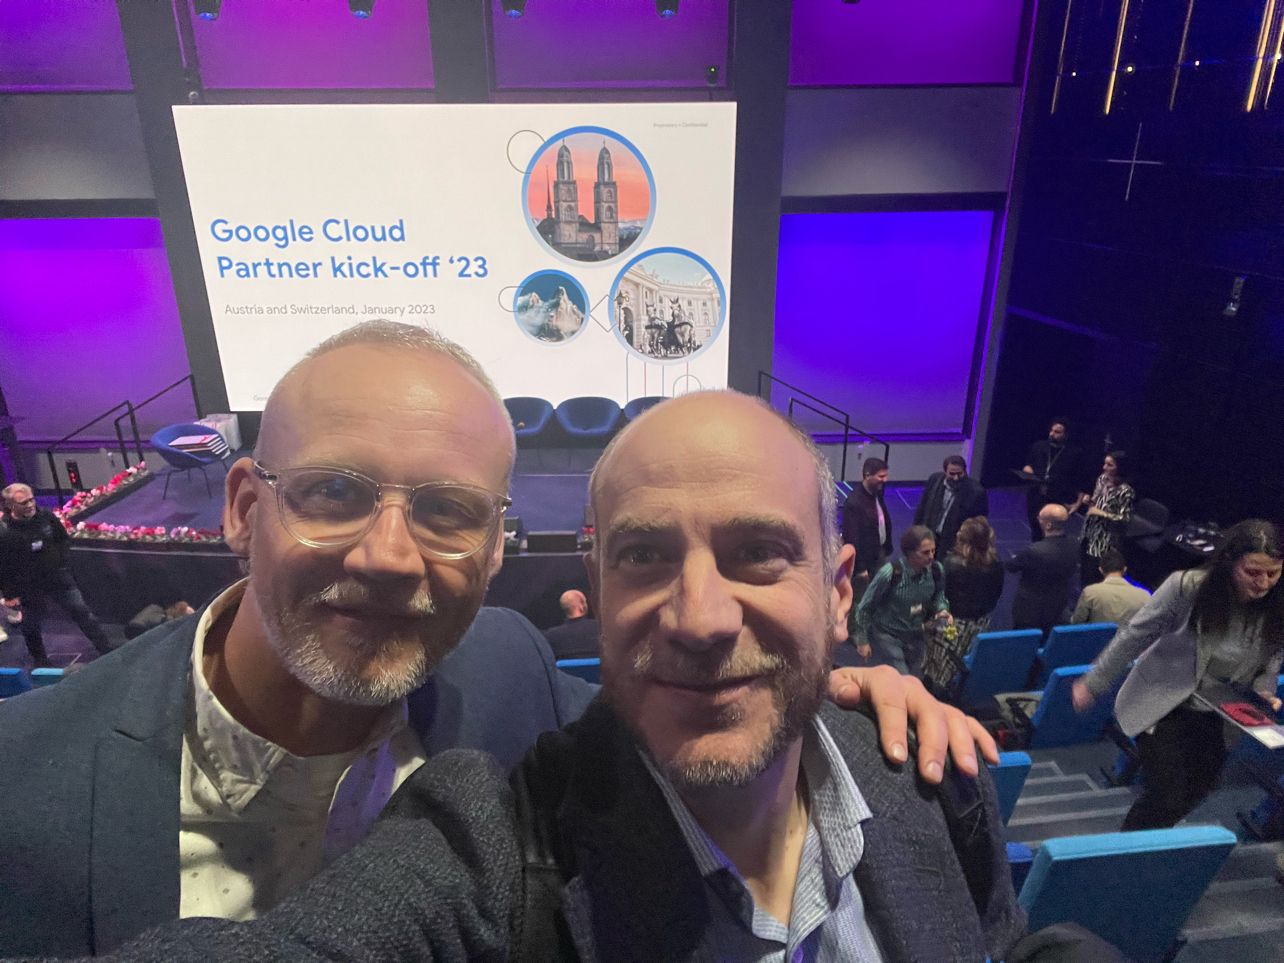 Kicking off 2023 with Google Cloud in Zurich